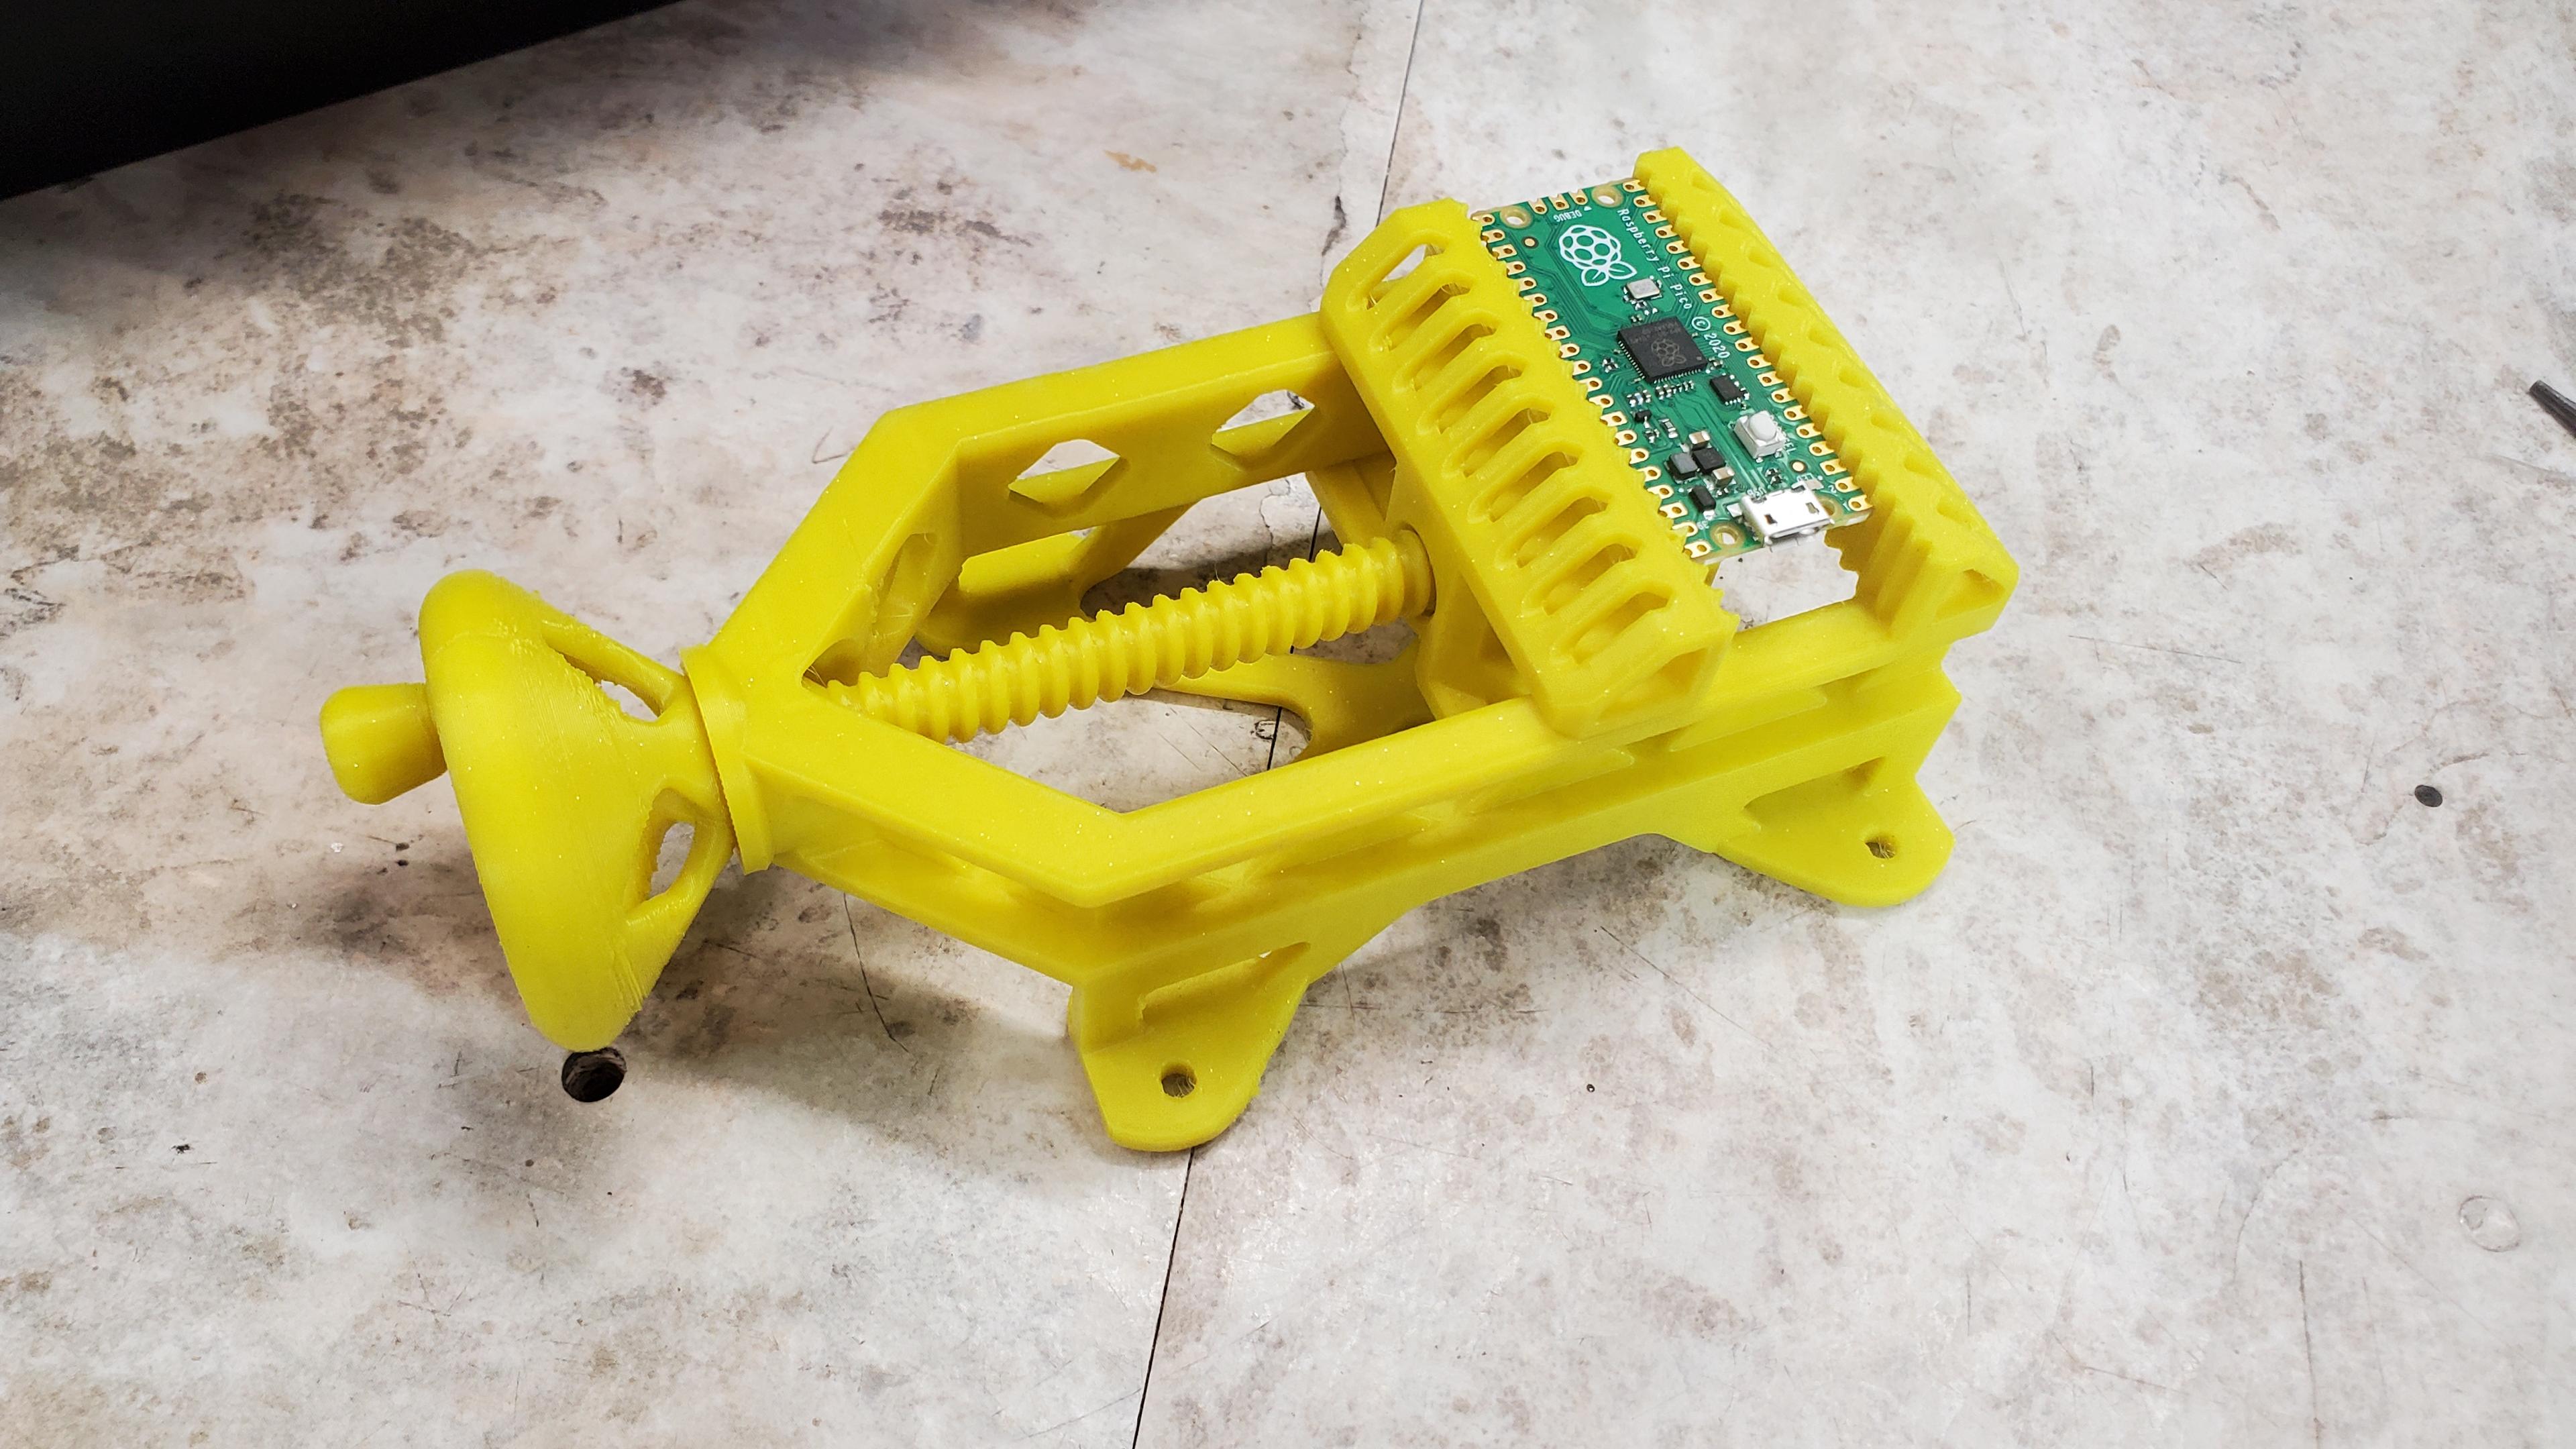 Mini Print-in-Place Vise - Printed in some sparta3d Lemon yellow sparkle ABS+ on a voron v2.4 with Revo hotend - 3d model